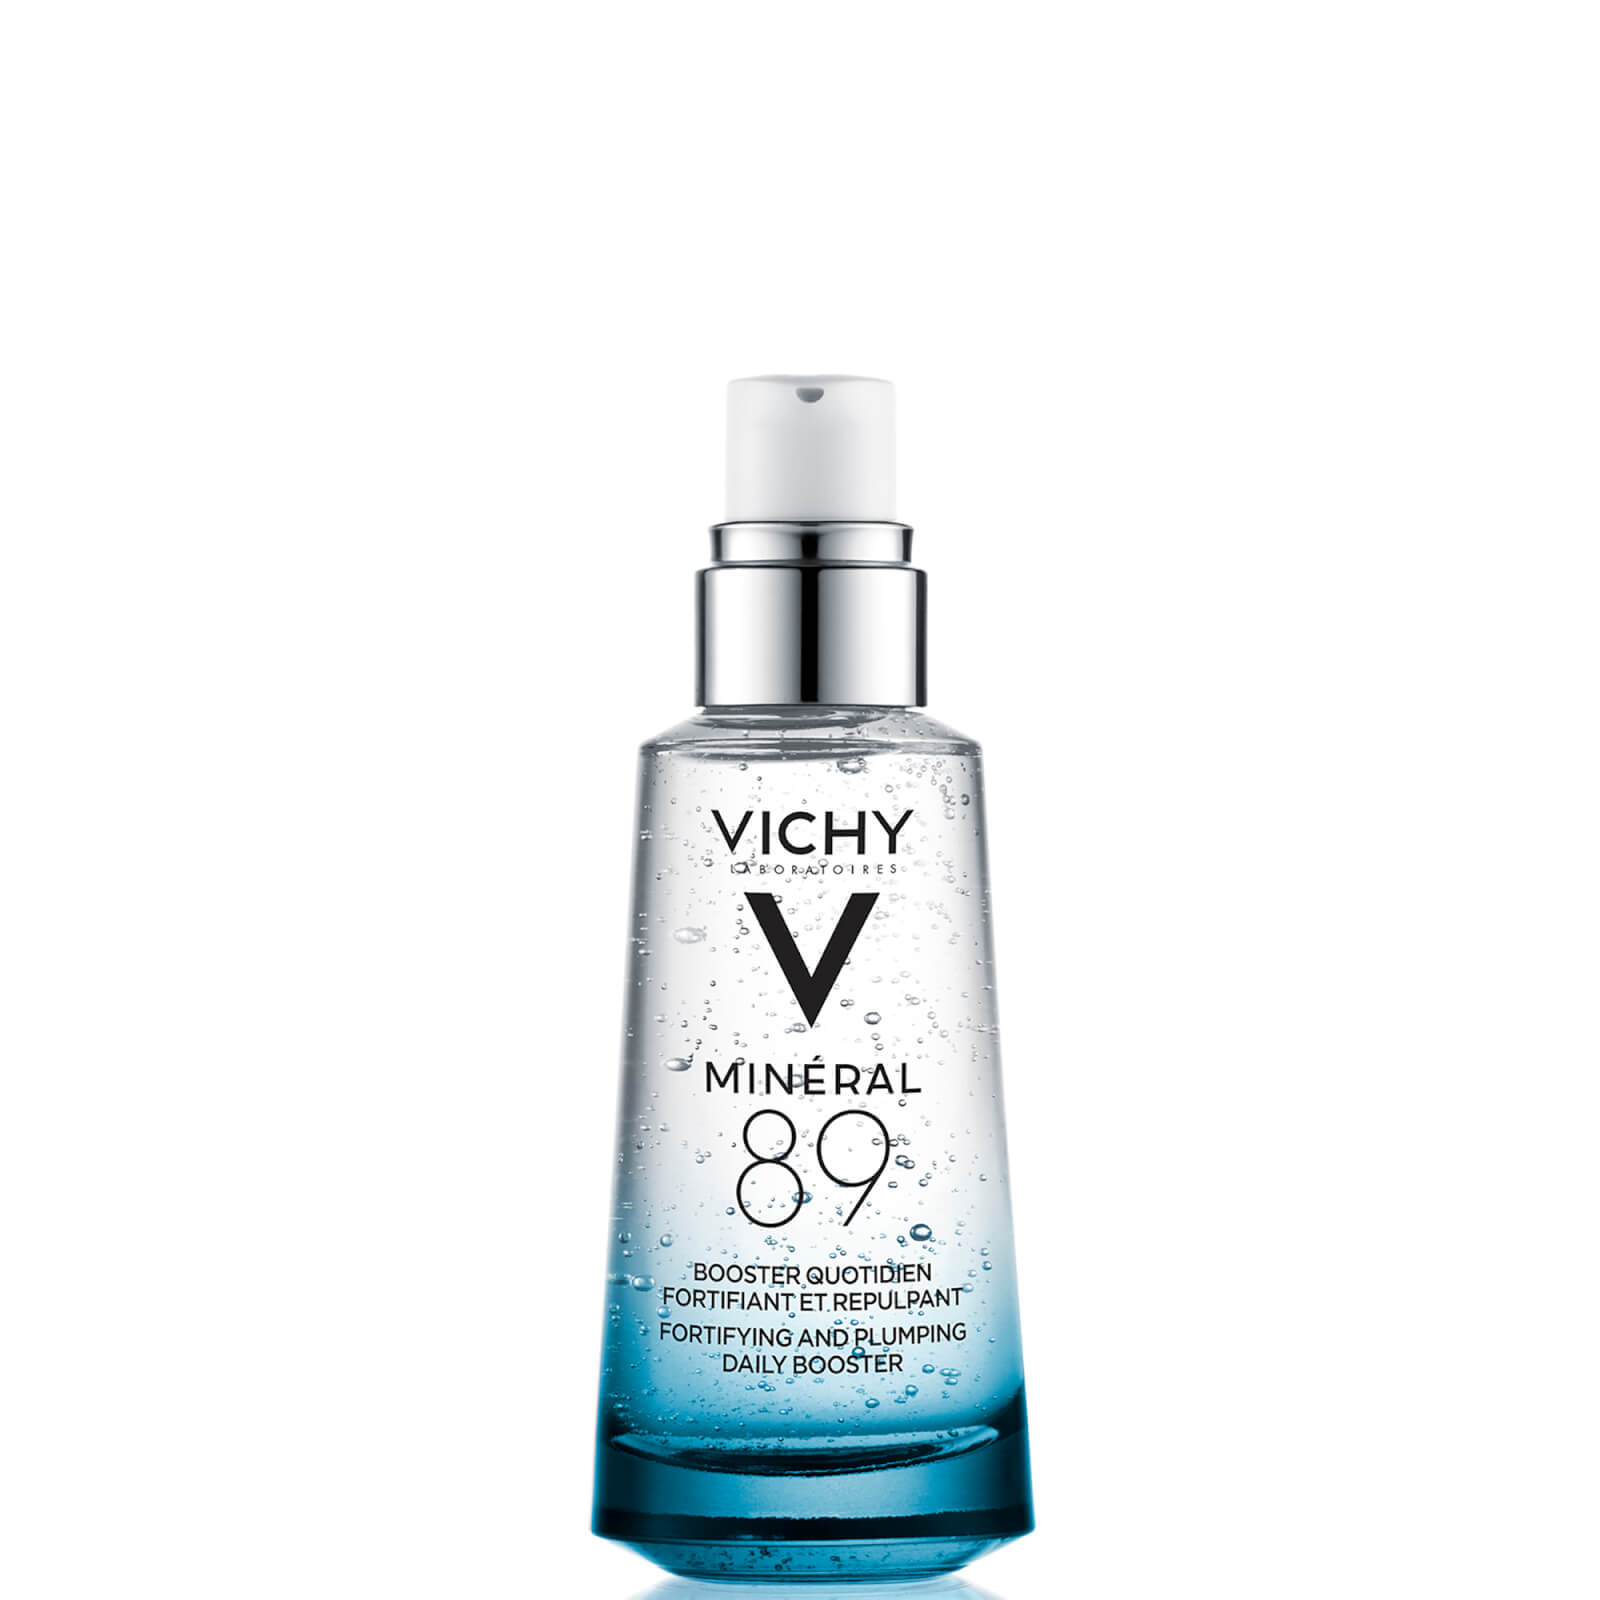 Photos - Cream / Lotion Vichy Minéral 89 Hyaluronic Acid Hydrating Serum - Hypoallergenic, for All 